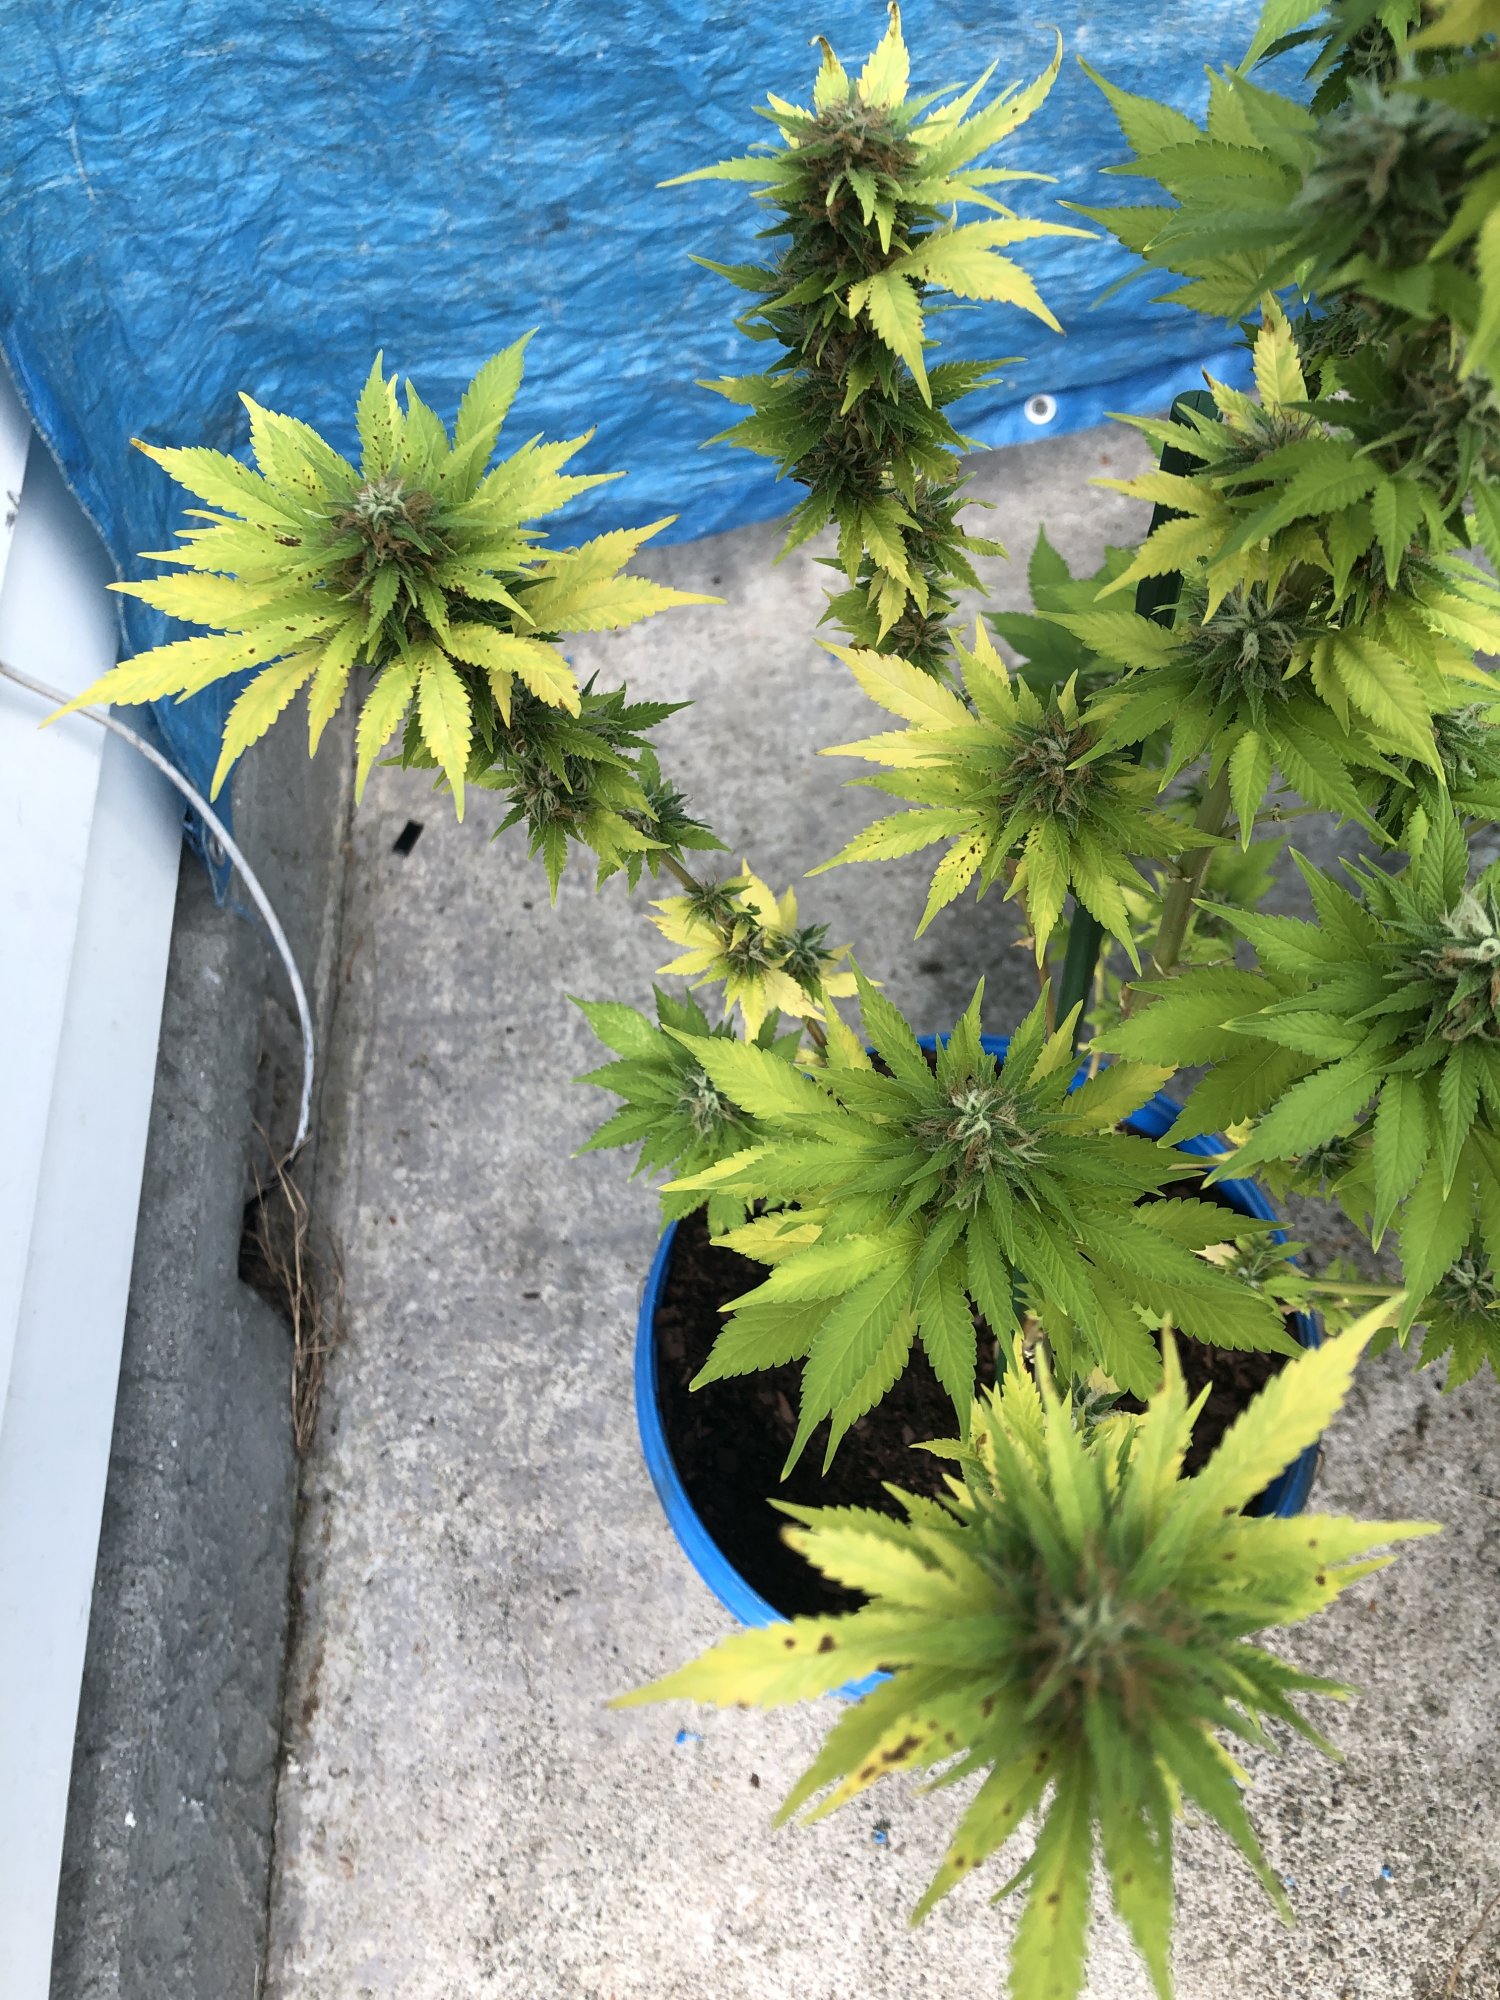 New grower need some guidance 2